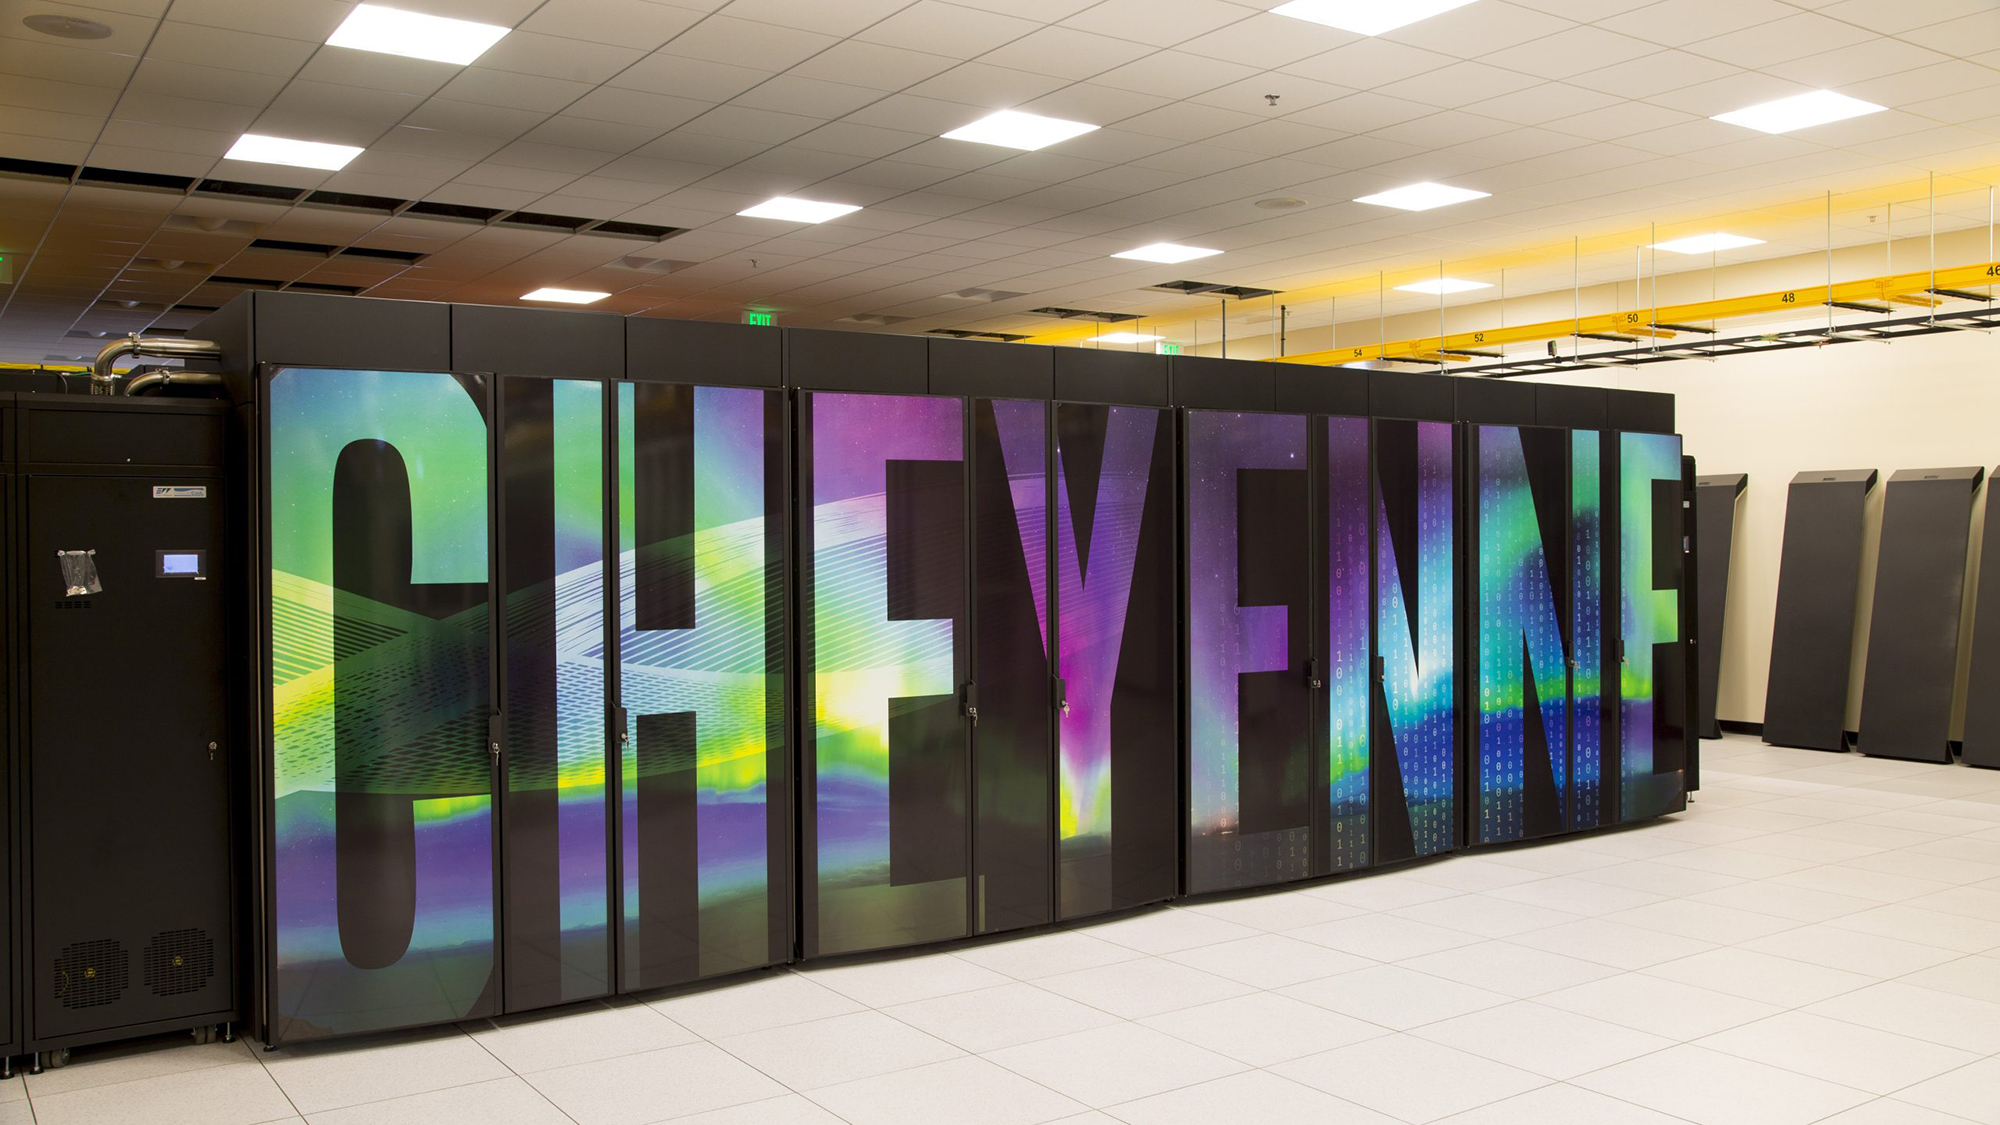 Cheyenne is located at the NCAR's Supercomputing Center in Cheyenne, Wyoming.